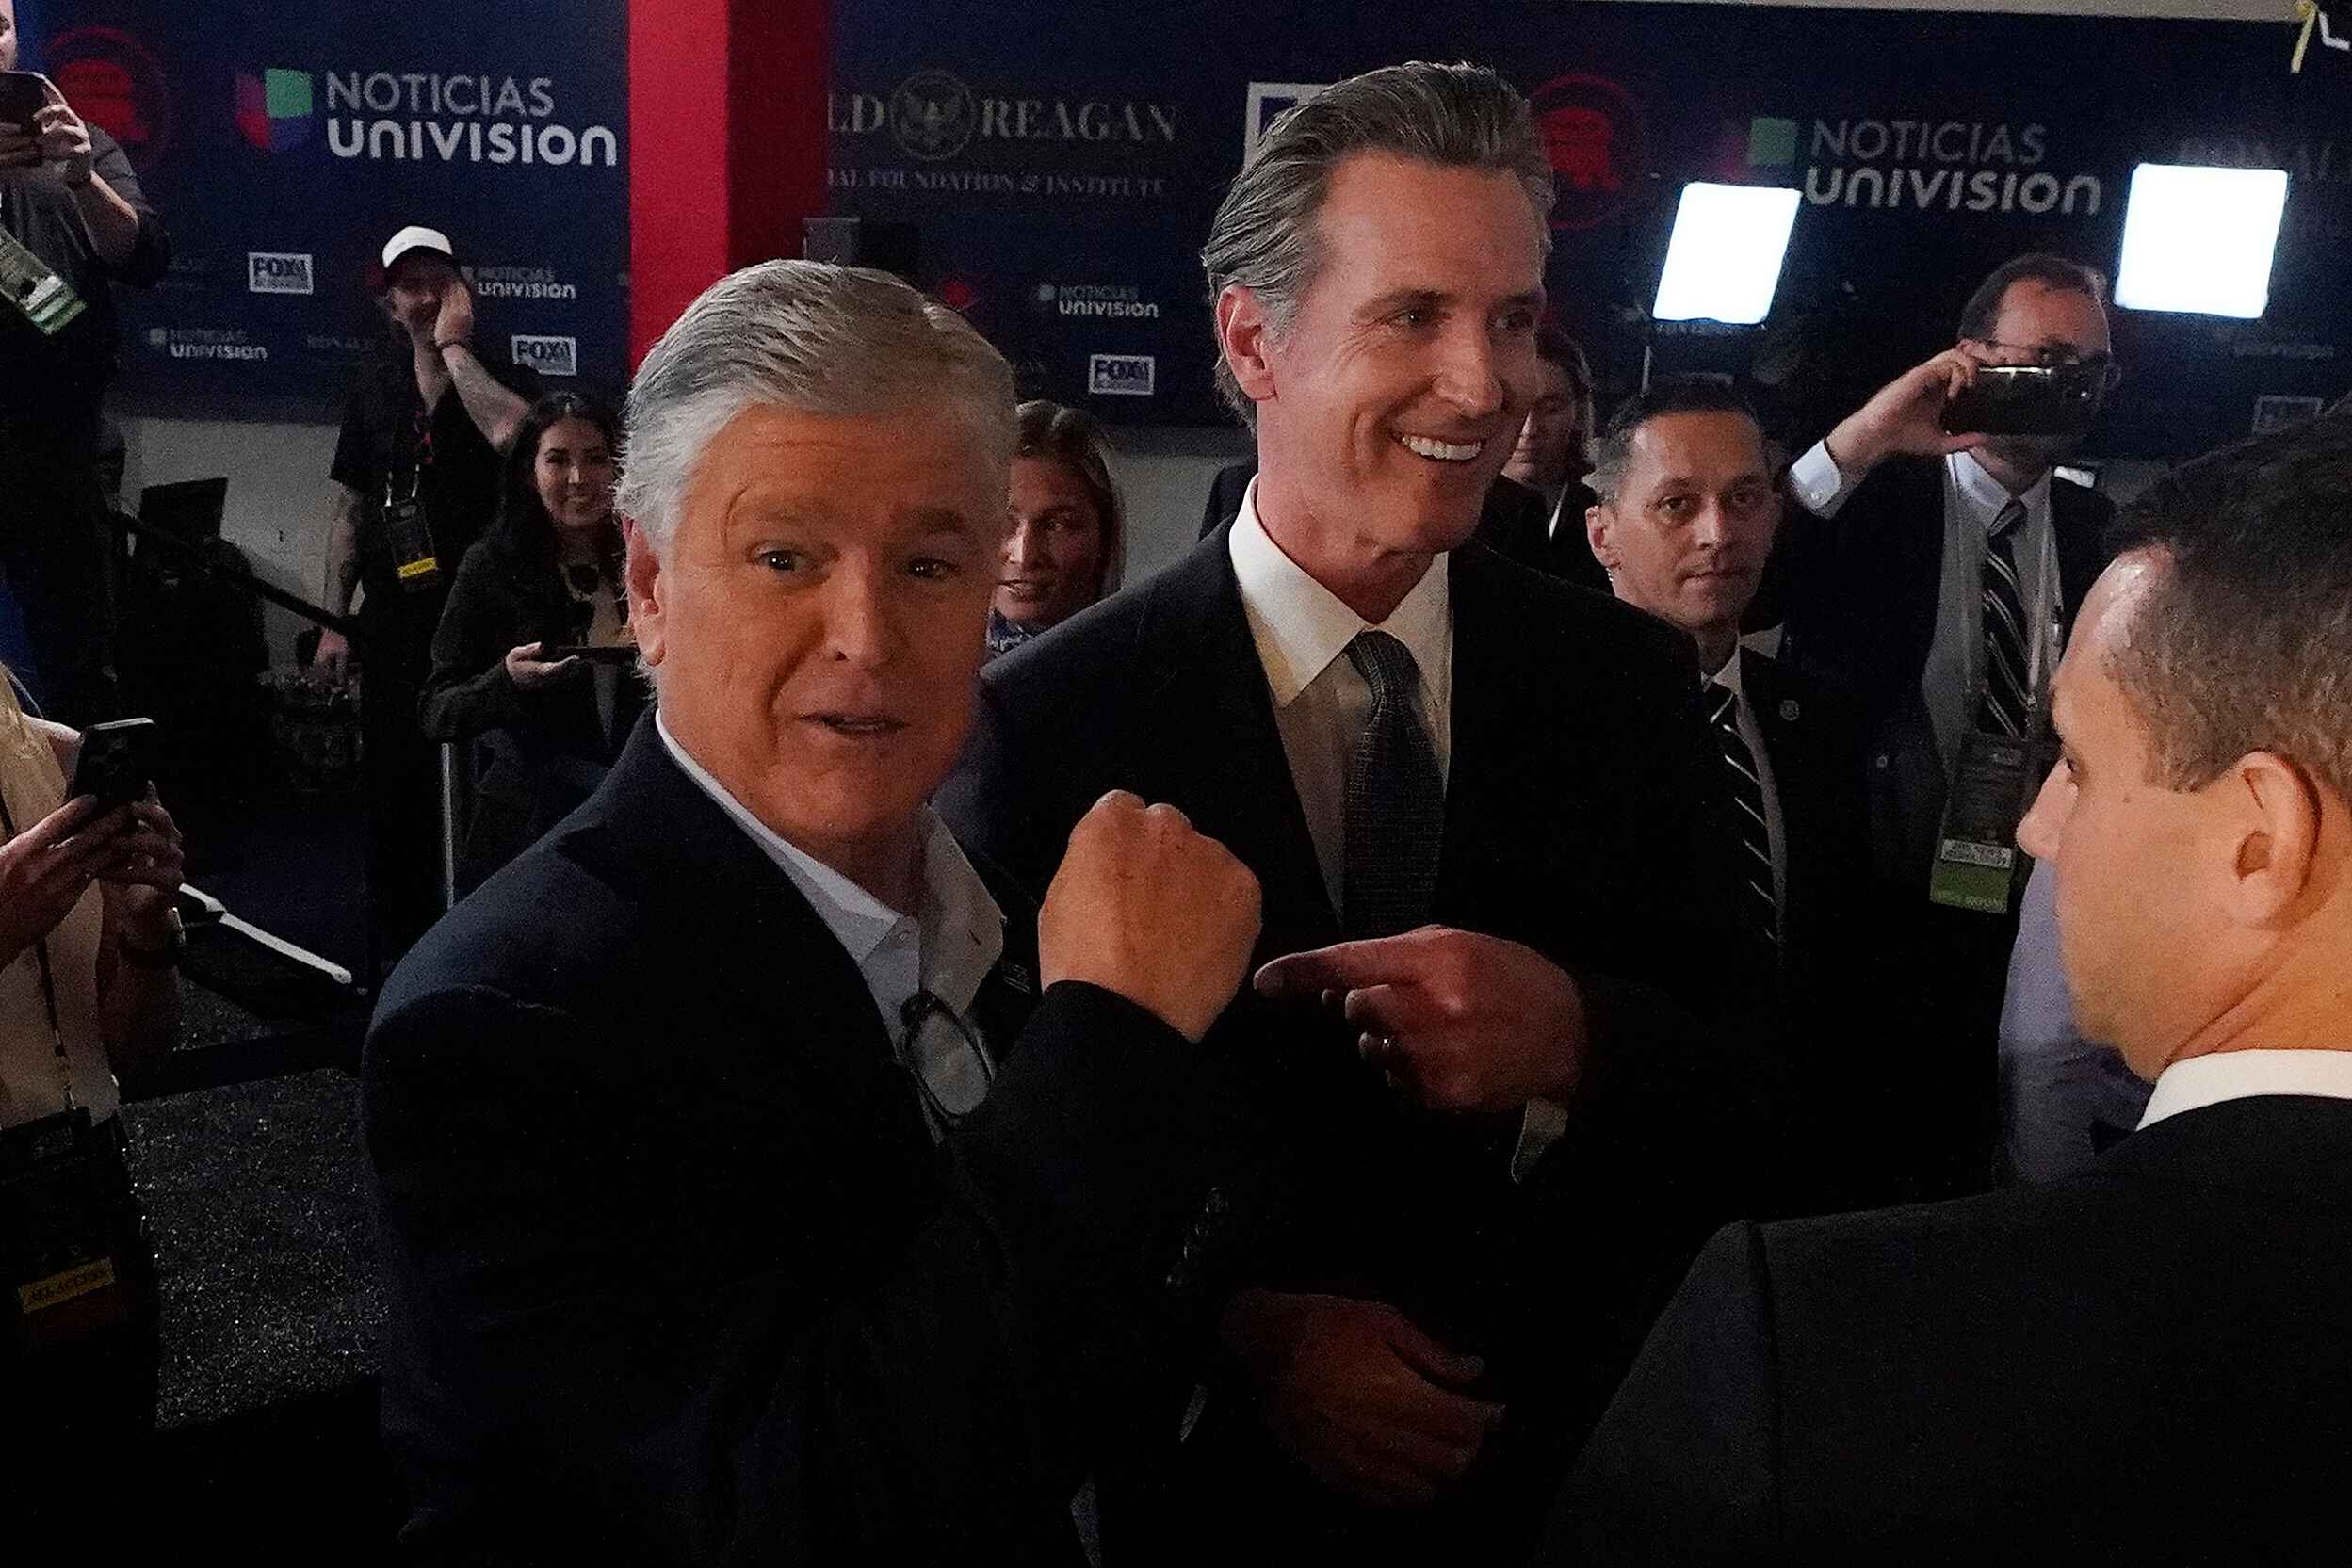 Florida Gov. Ron DeSantis and California Gov. Gavin Newsom will face off in a live debate hosted by Fox News and moderated by Sean Hannity on Thursday night.